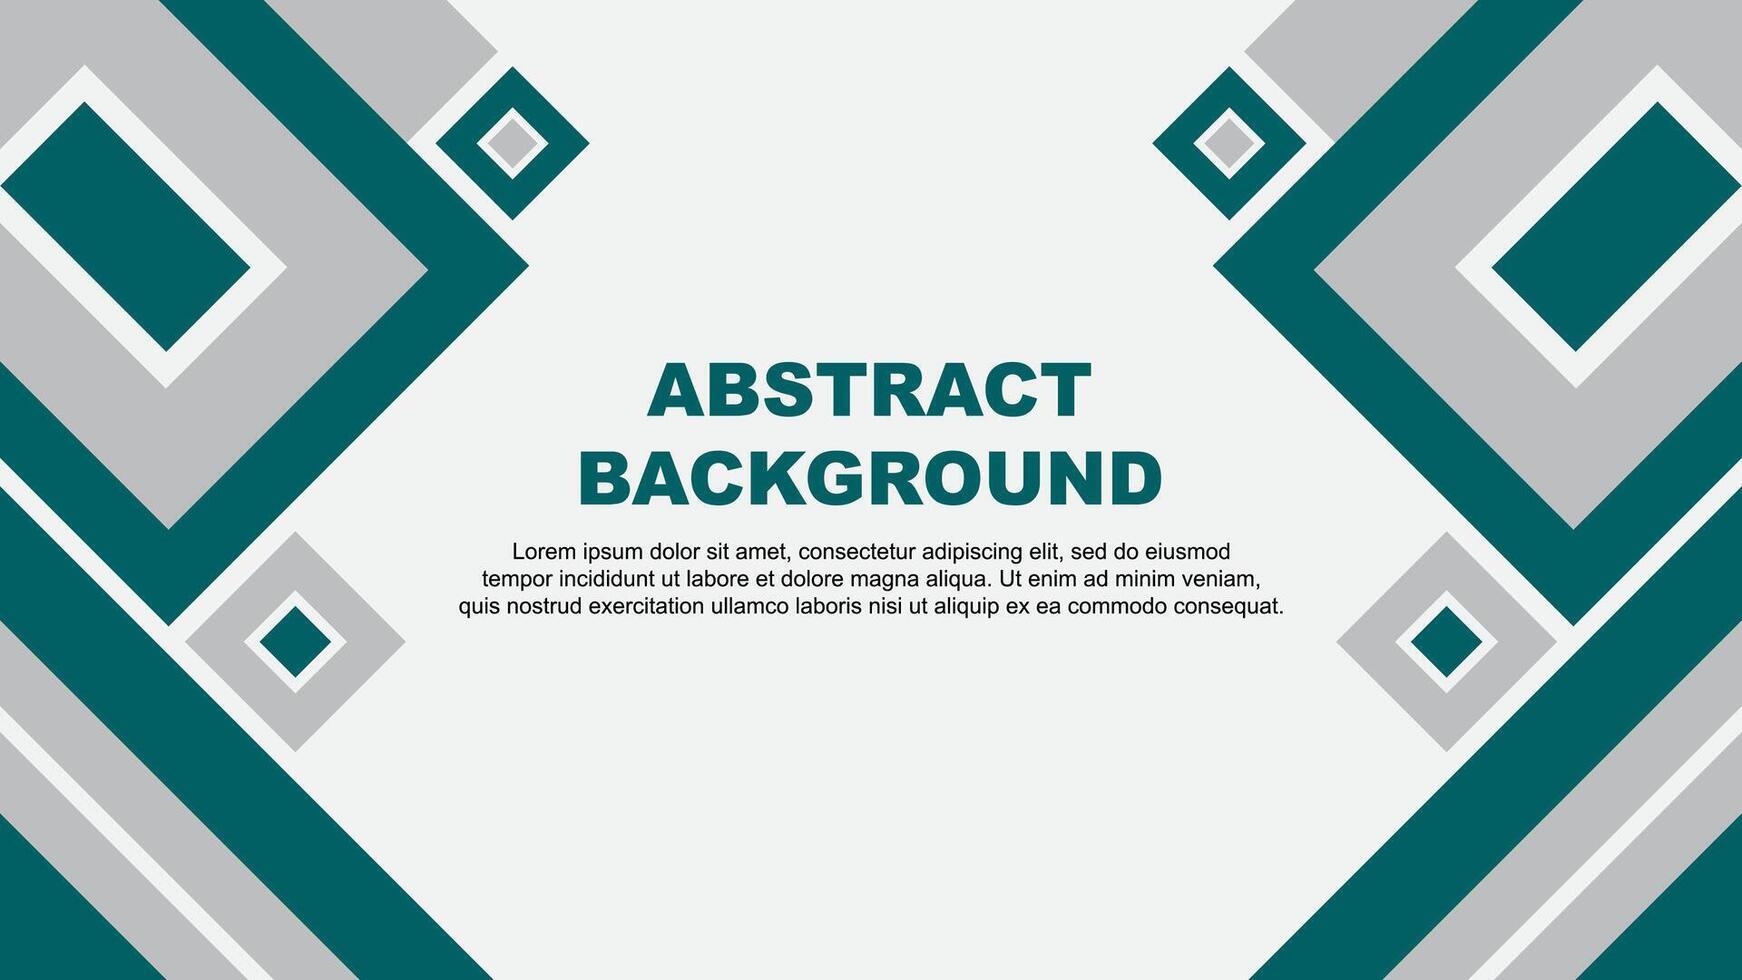 Abstract Teal Background Design Template. Banner Wallpaper Vector Illustration. Teal Cartoon